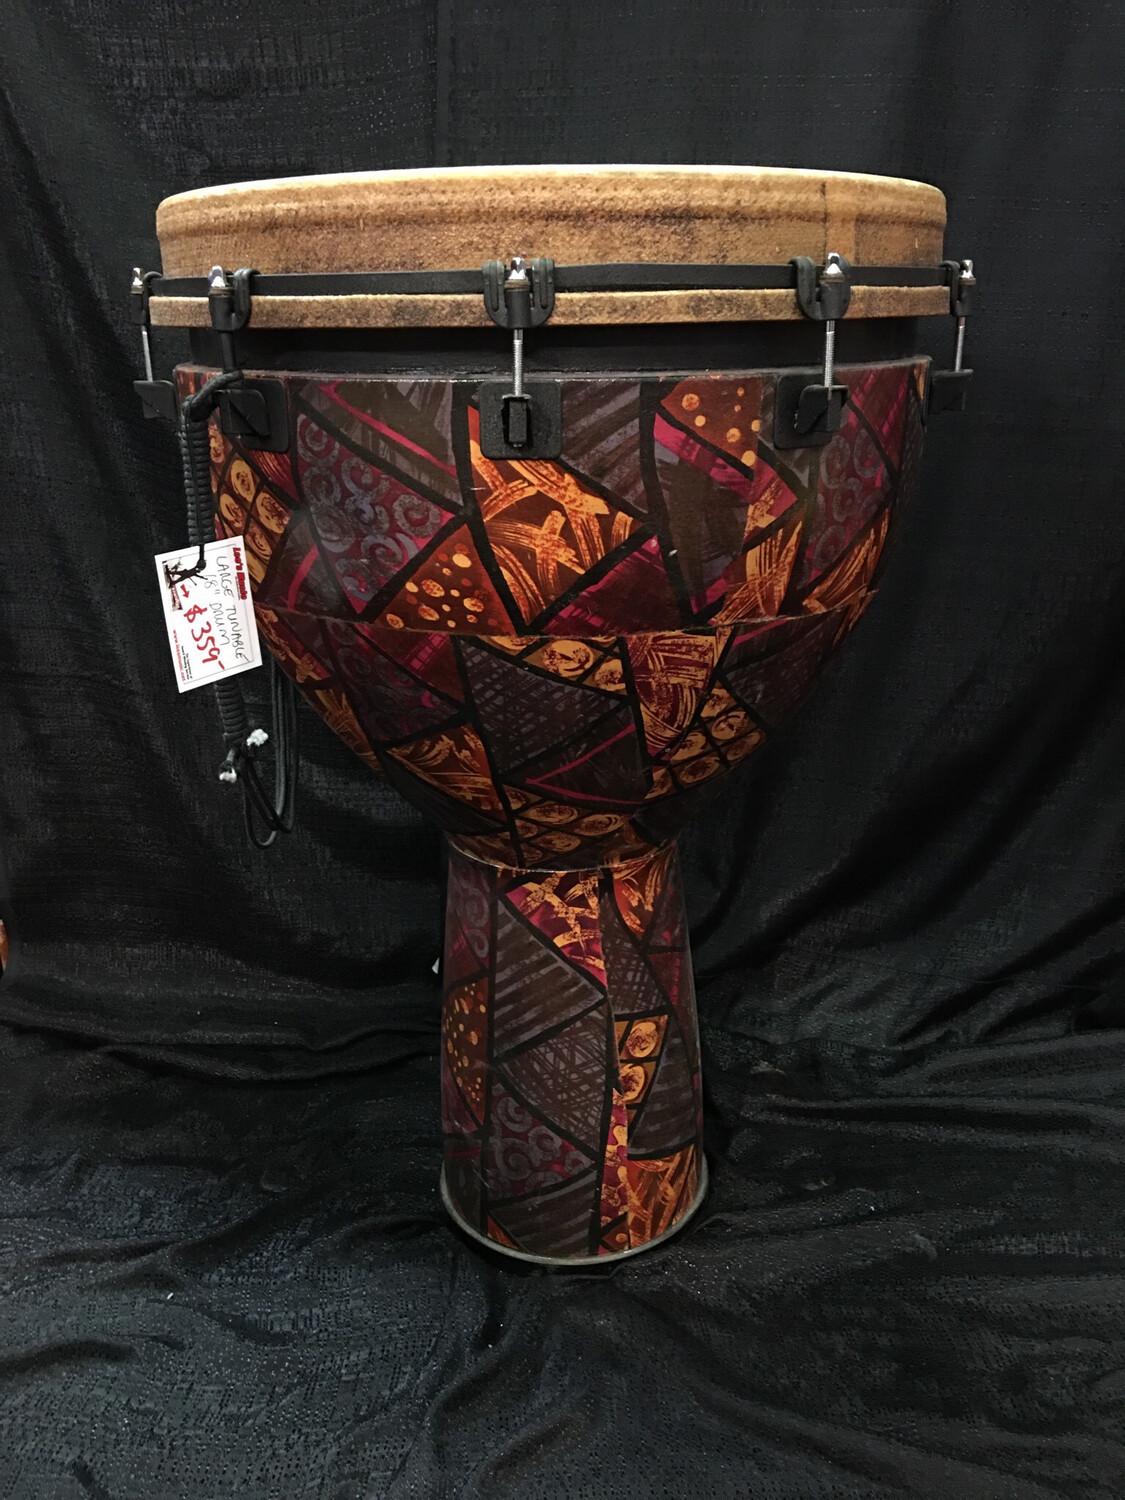 Remo Tuneable 18” Drum